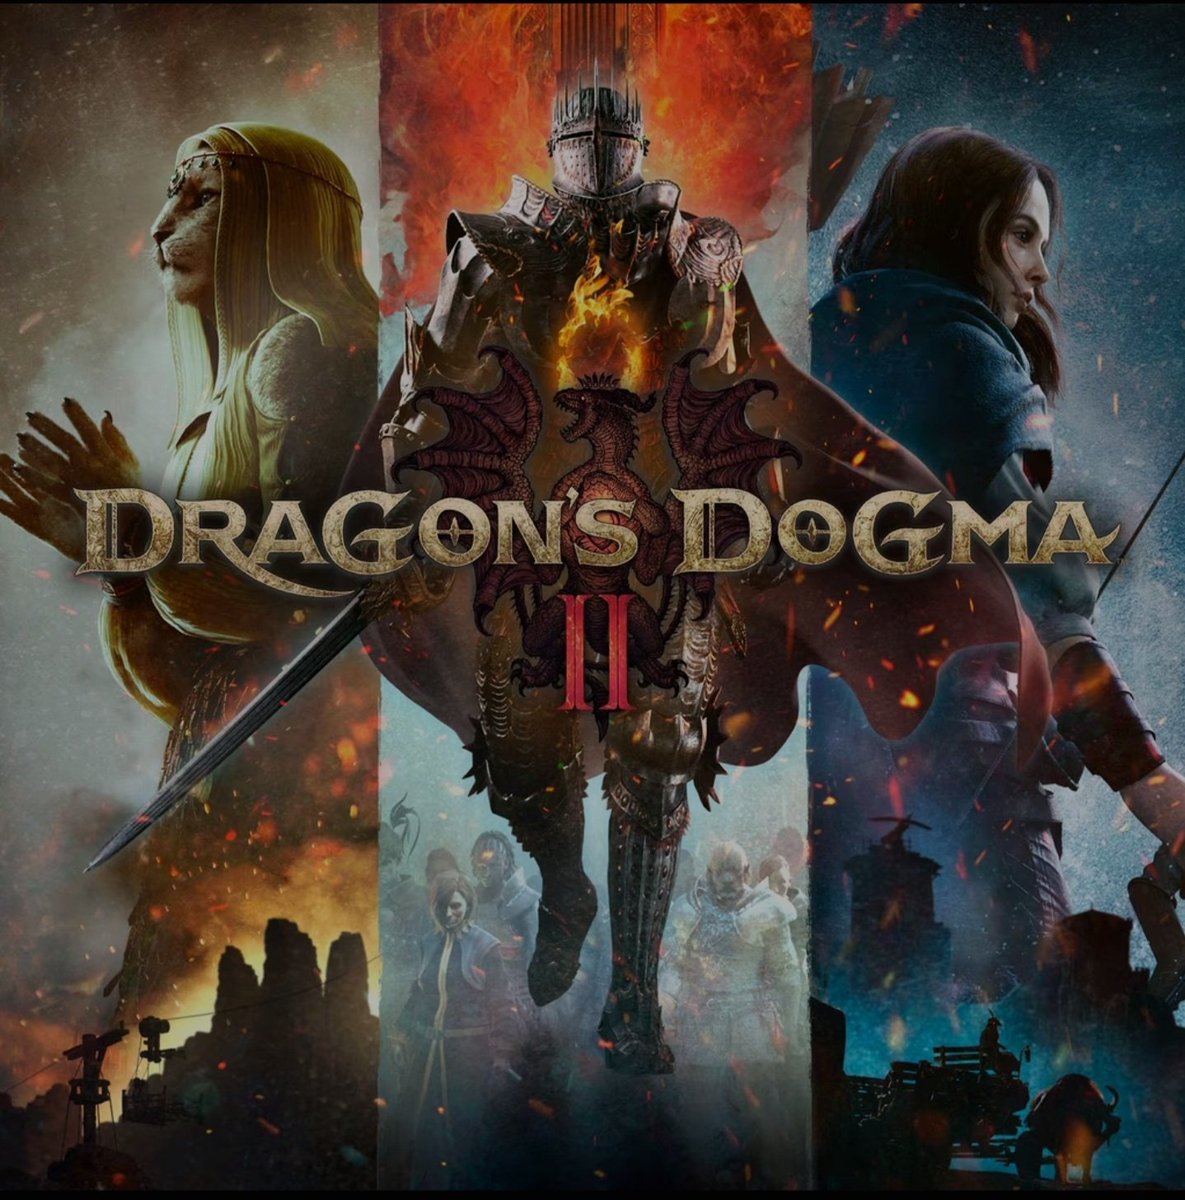 Not surprised at all to see glowing previews for Dragon's Dogma 2 dropping today Capcom have just been on a seriously incredible run of quality games ever since 2017. One of the most consistent publishers in the industry right now in terms of output